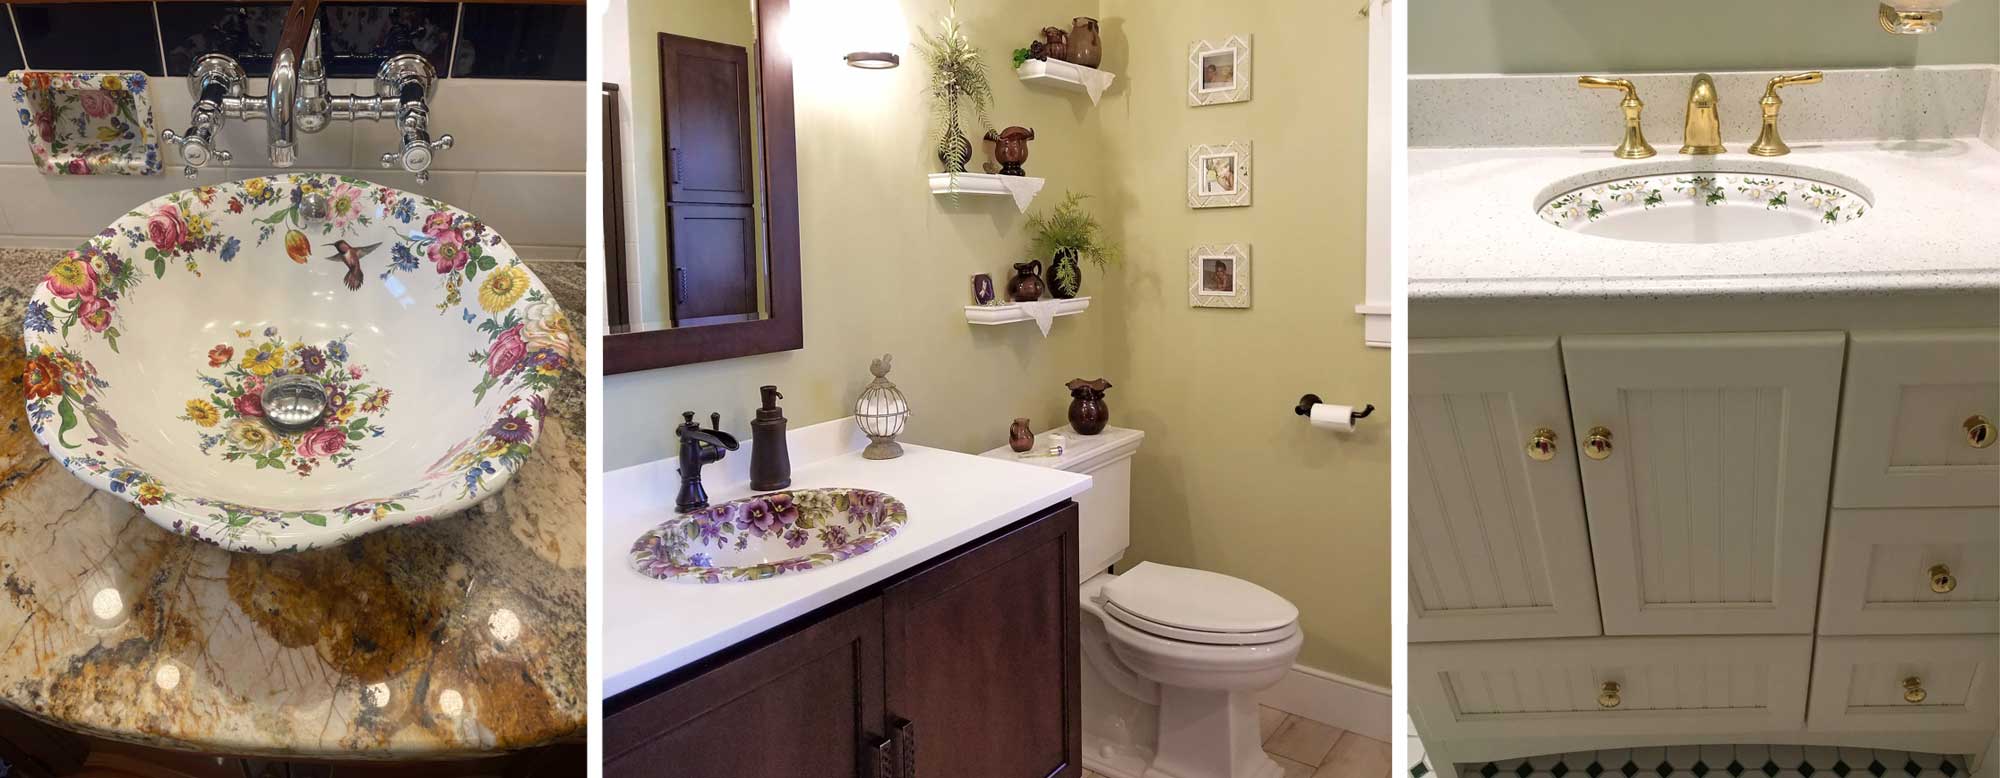 stylish bathroom design ideas with hand painted sinks with flowers